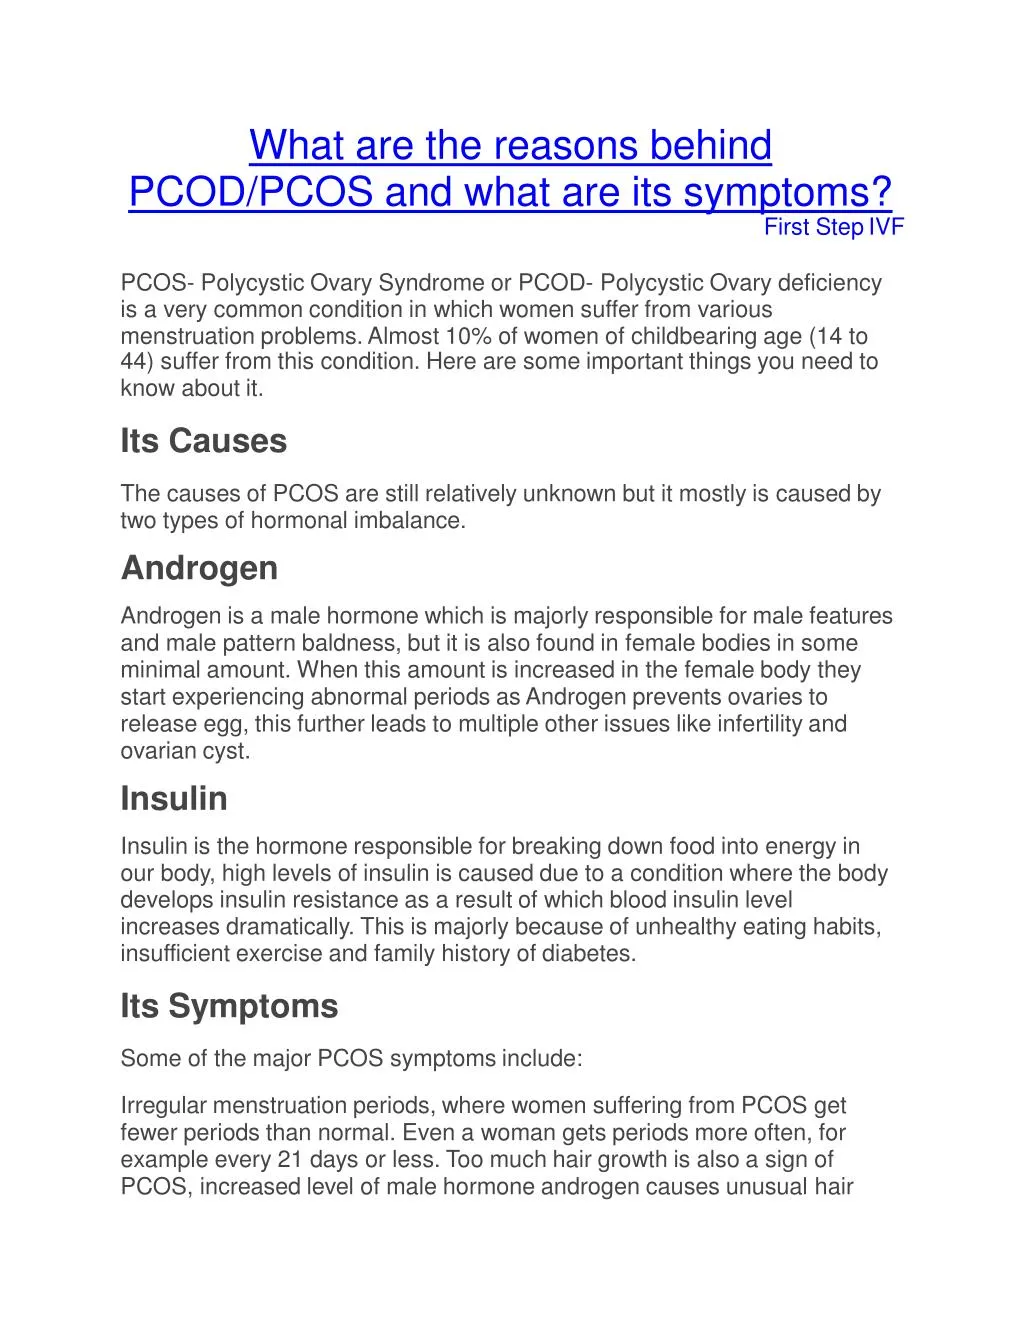 what are the reasons behind pcod pcos and what are its symptoms first step ivf